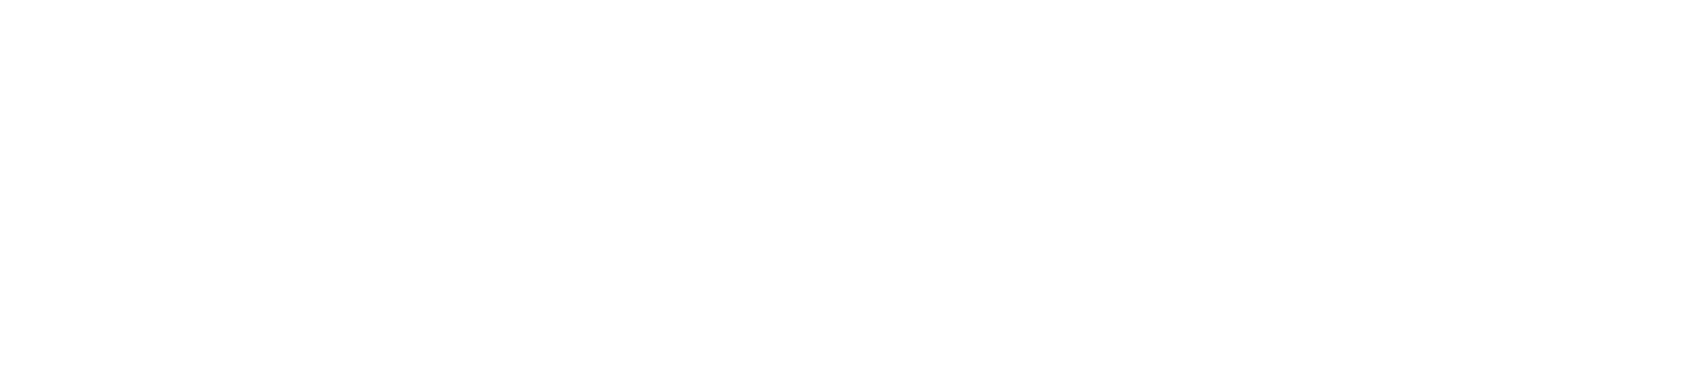 Paradox Interactive logo large for dark backgrounds (transparent PNG)